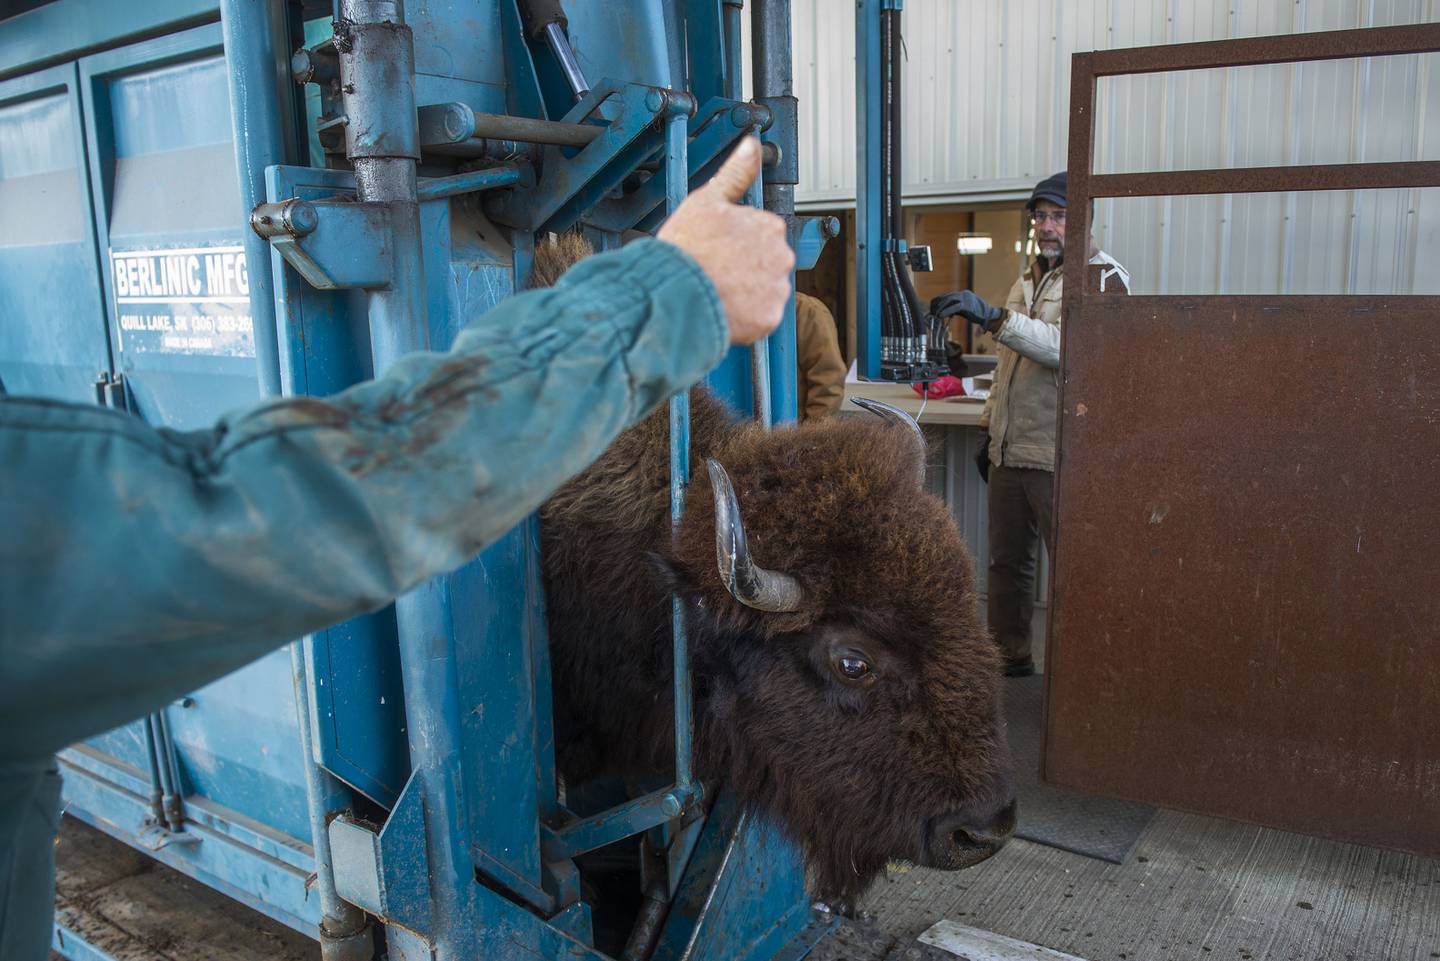 Partially obscured, veterinarian Dr. Steve Baker of Polo gives the thumbs up to Nachusa manager Bill Kleiman to indicate this bison is vaccinated and ready to rejoin the herd.